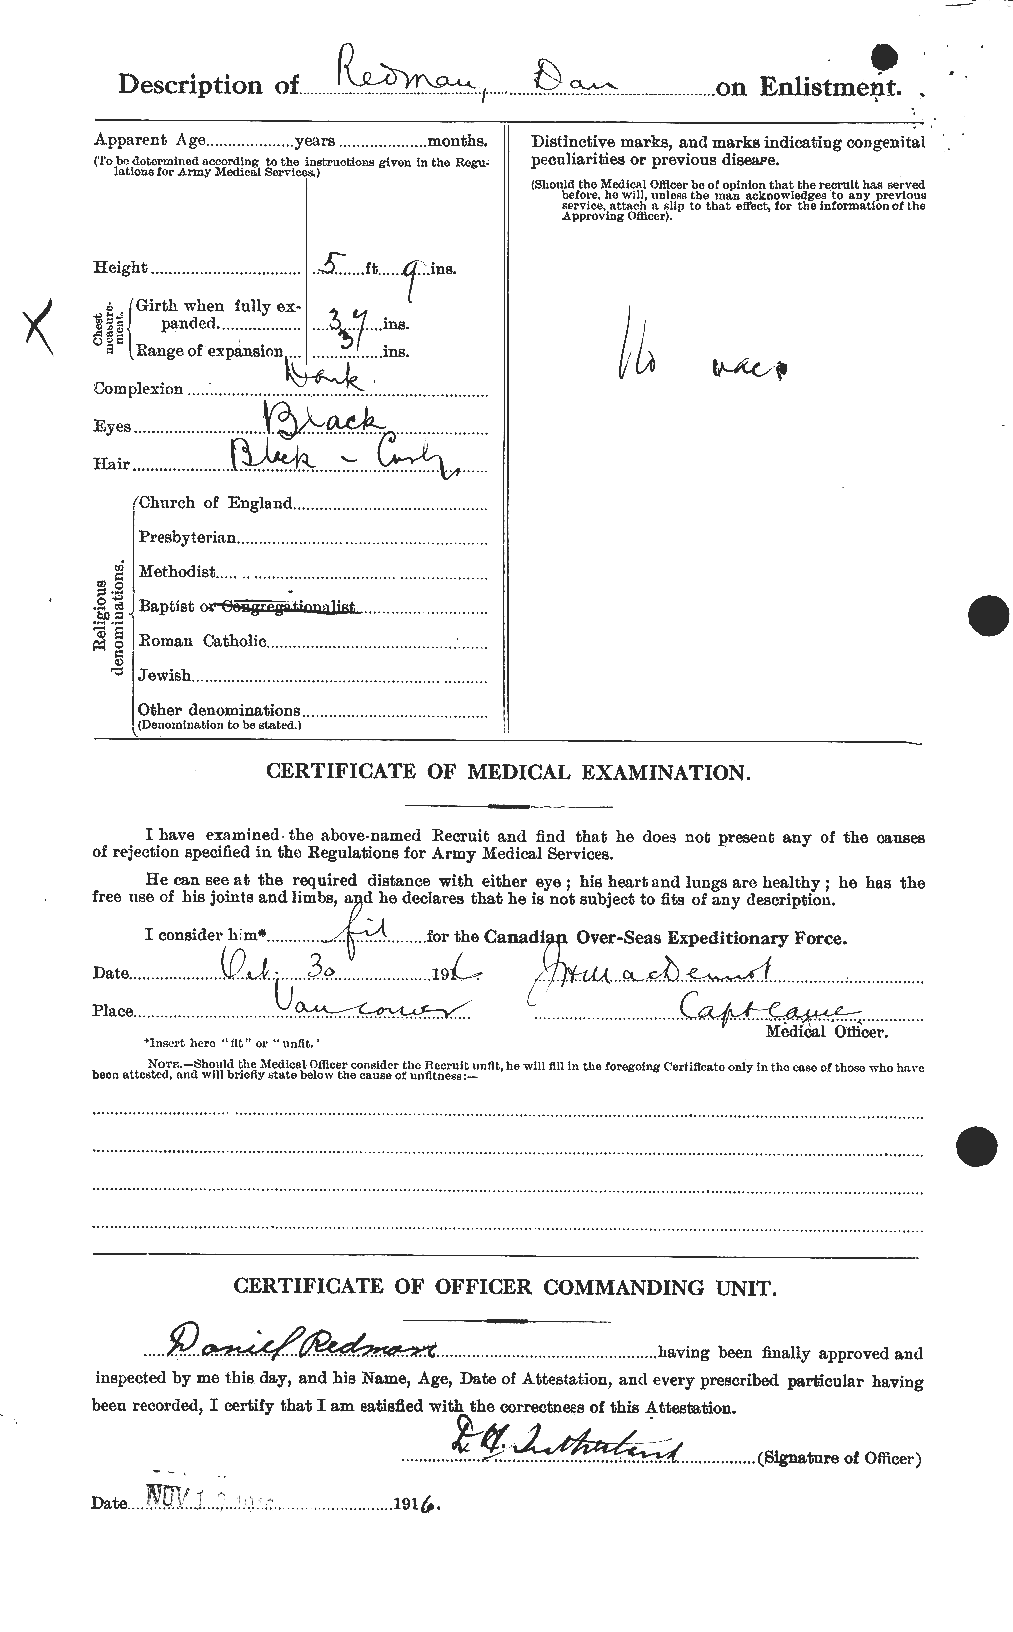 Personnel Records of the First World War - CEF 596026b